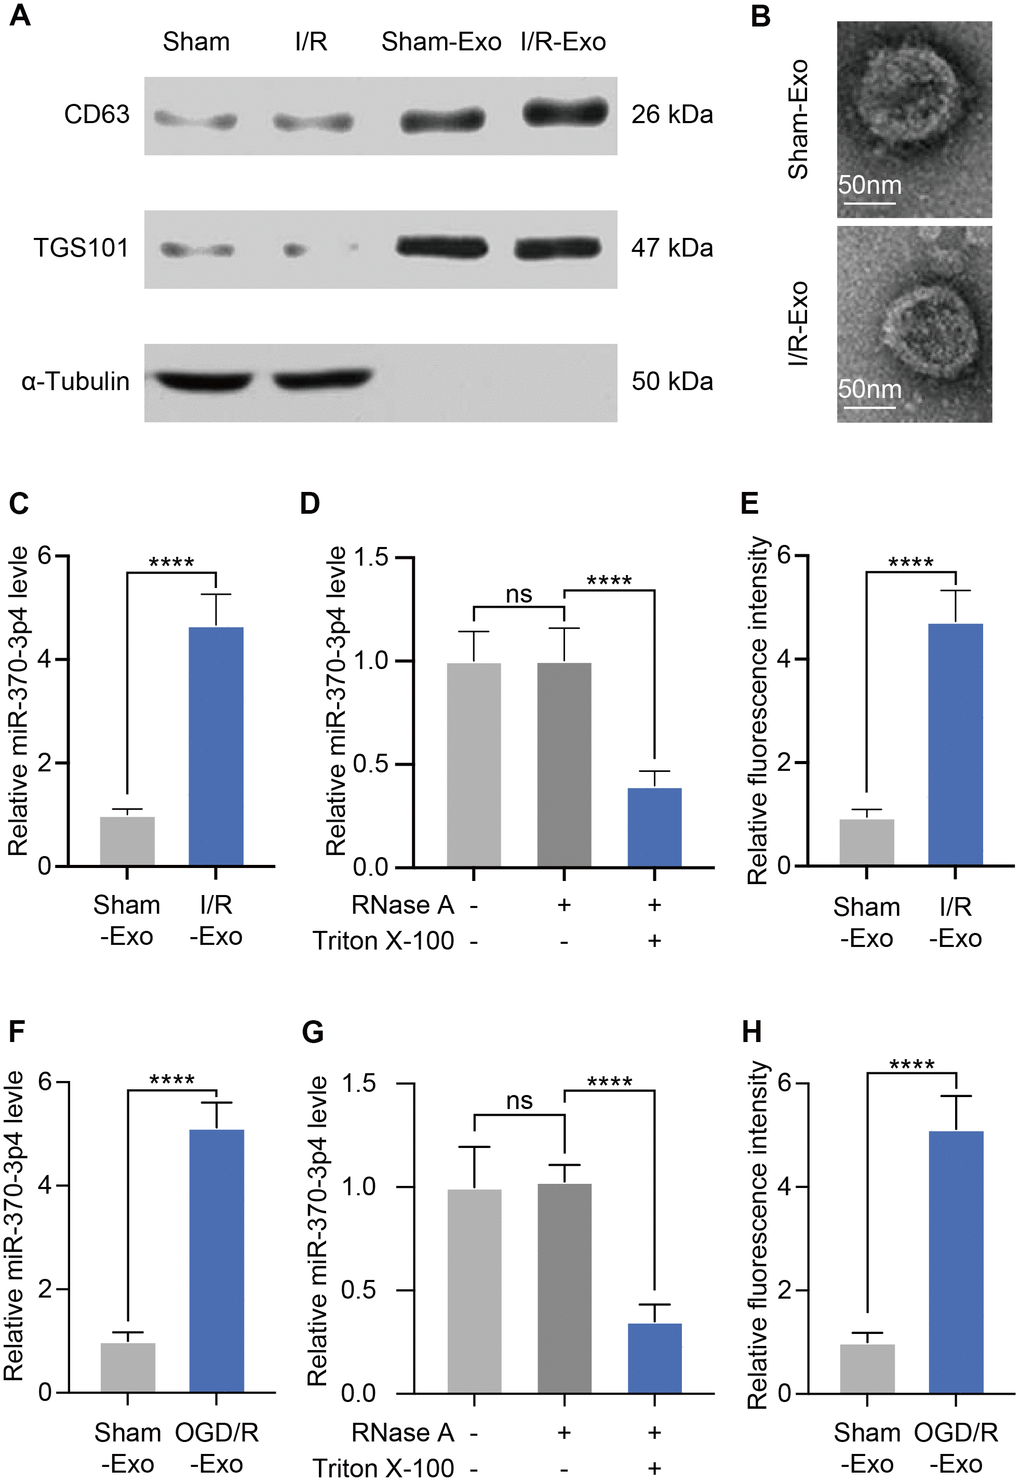 Exosomes derived from cerebral I/R rats exhibit miR-370-3p upregulation. (A) The levels of CD63, TSG101, and α-Tubulin were tested by western blotting. (B) Cerebral MVs-derived exosomes were analyzed via electron microscopy (scale bar, 50 nm). (C) Relative miR-370-3p expression in exosomes derived from MVs were tested by qPCR. (D) After treatment with 2 mg/ml RNase alone or combined with 0.1% Triton X-100, miR-370-3p level was analysed using qPCR in the culture medium of MVs. (E) miR-370-3p expression was assessed by fluorescence in situ hybridization (FISH) in cerebral I/R rats and healthy rats. (F) miR-370-3p expression levels in bEND.3, were assessed via qPCR. (G) After treatment with 2 mg/ml RNase alone or combined with .1% Triton X-100, miR-370-3p level was analysed using qPCR in the culture medium of bEND.3. (H) Quantitative analysis indicated that relative fluorescence intensity in bEND.3. ** p